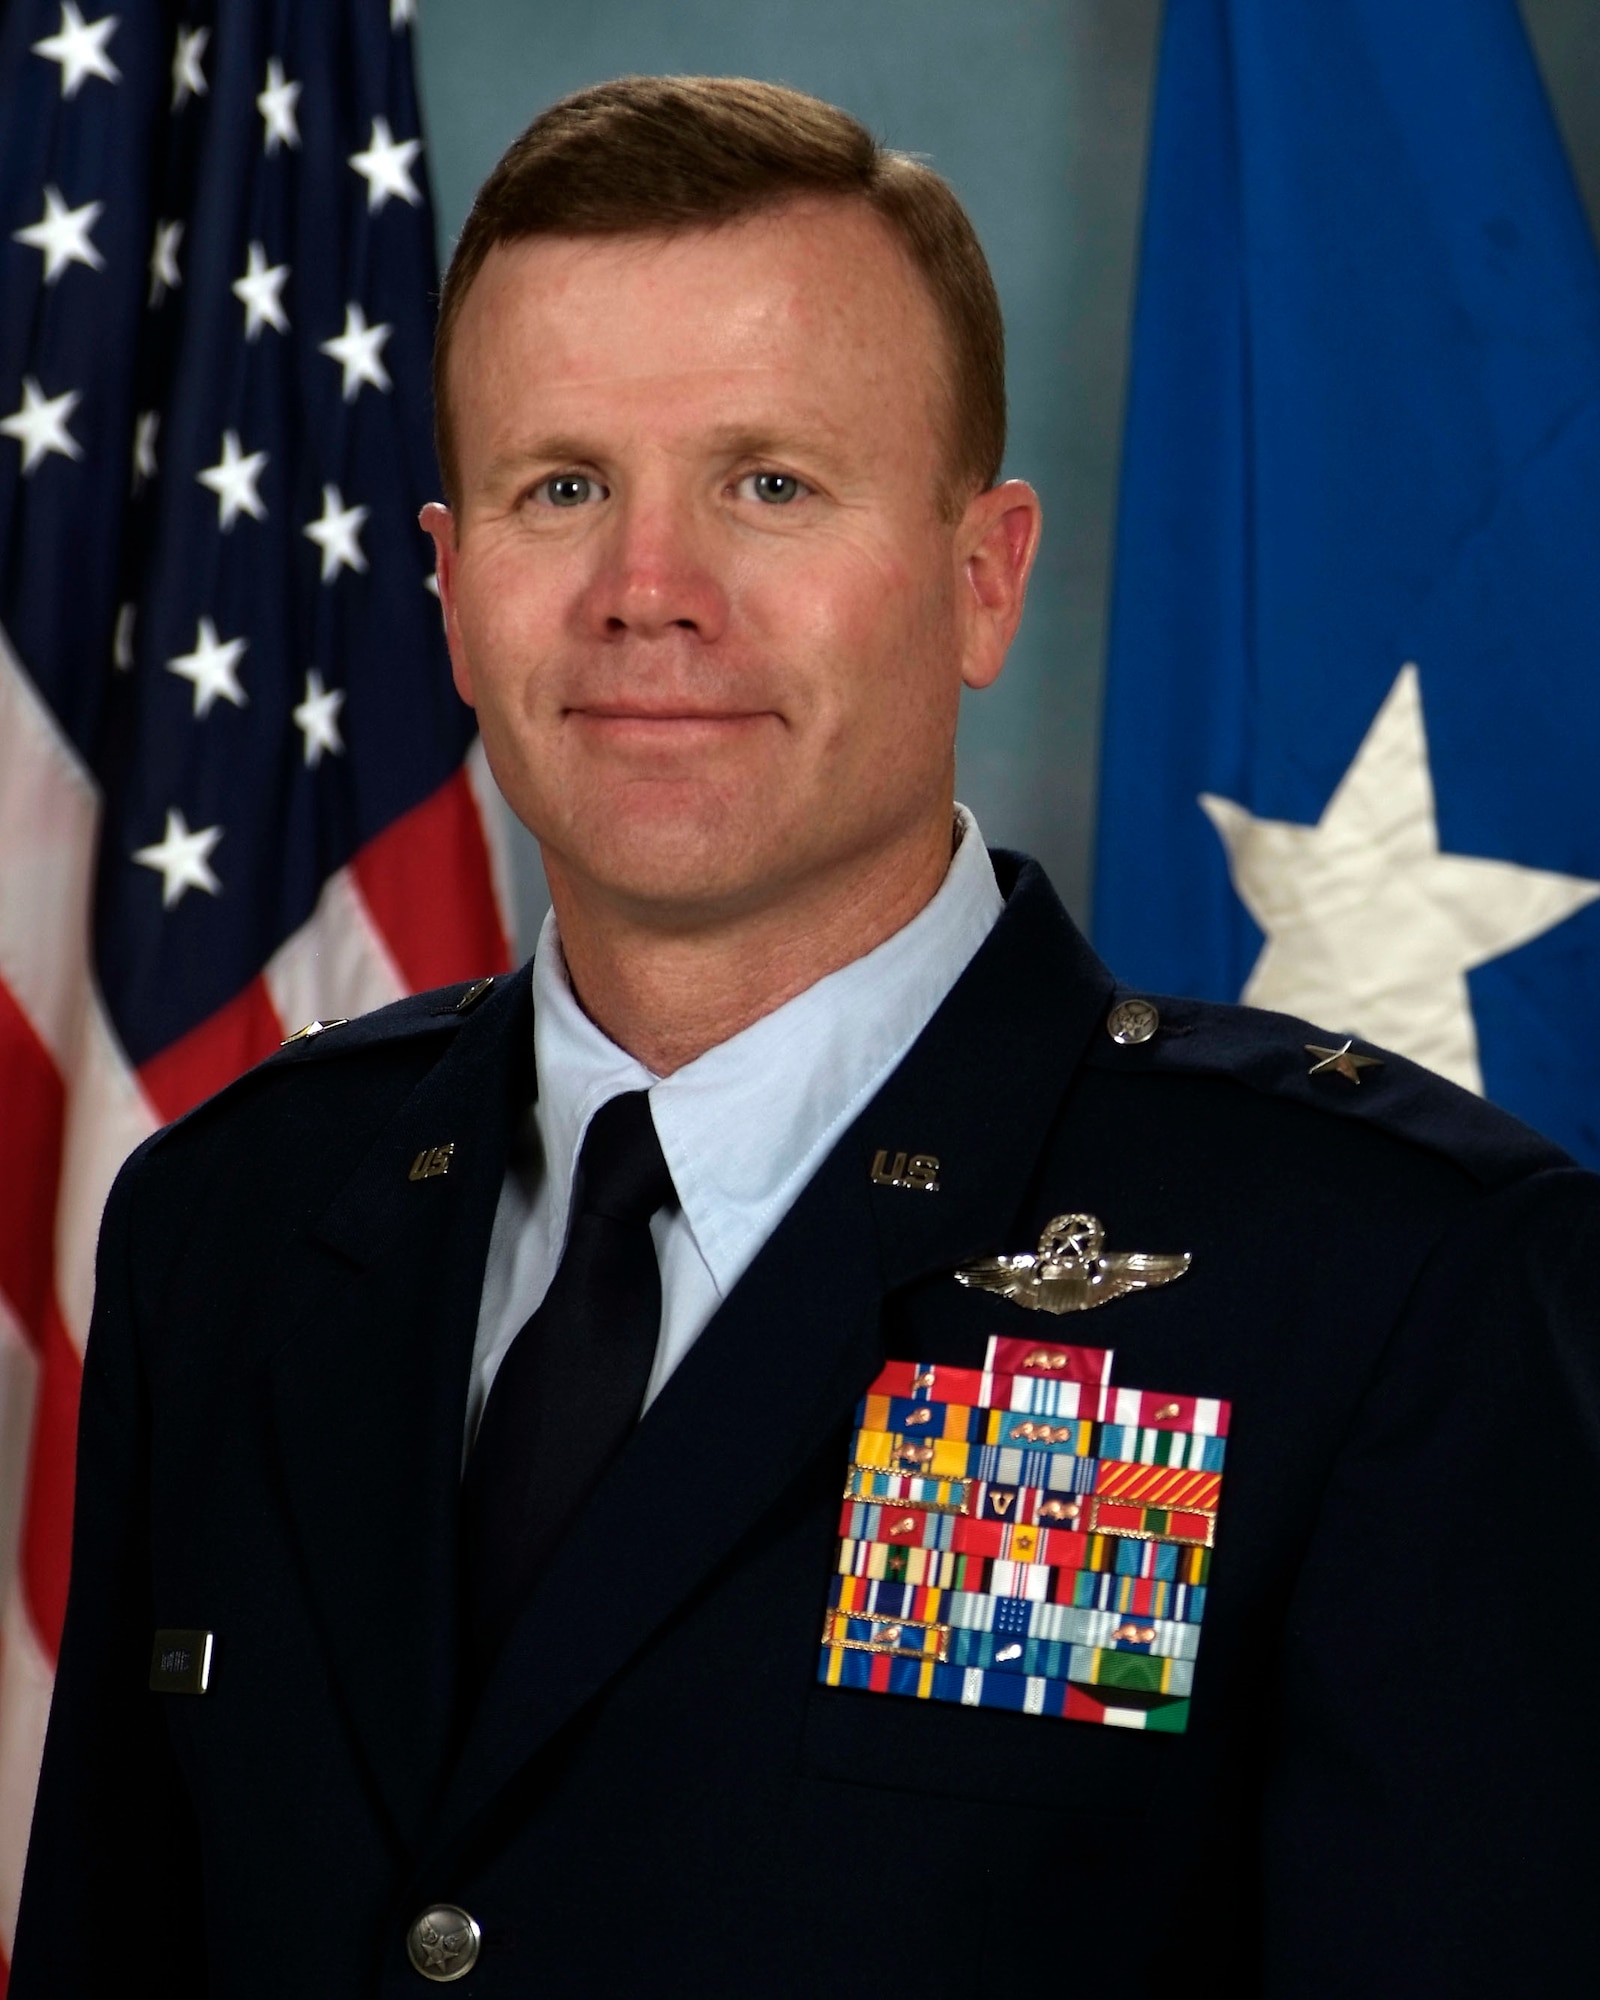 LAUGHLIN AIR FORCE BASE, Texas -- Brig. Gen. Tod Wolters will speak at Specialized Undergraduate Pilot Training class 11-05's graduation Feb. 18.